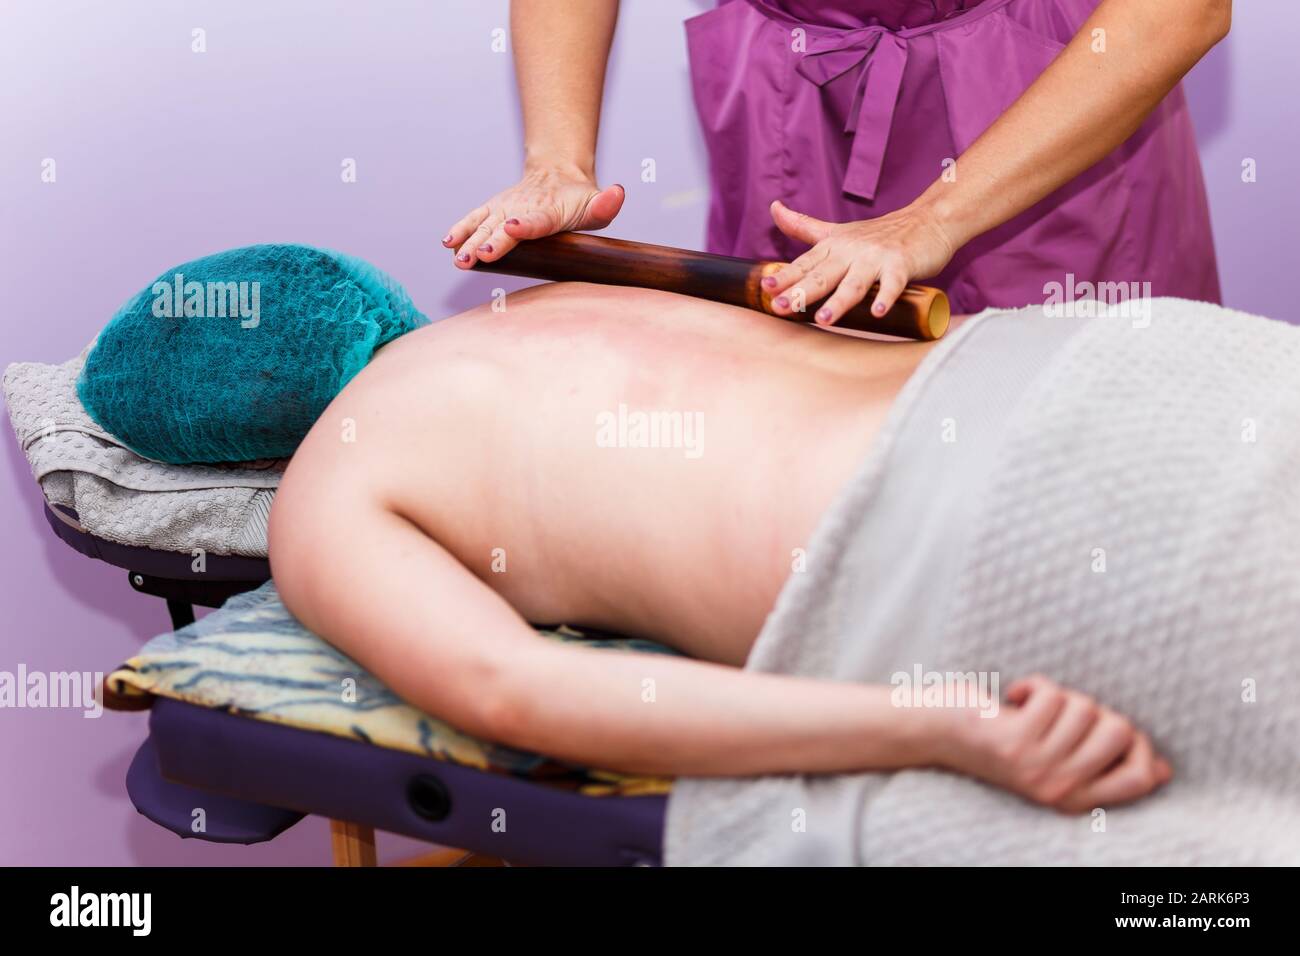 Professional massage therapist kneading back of client by spa roller Stock Photo